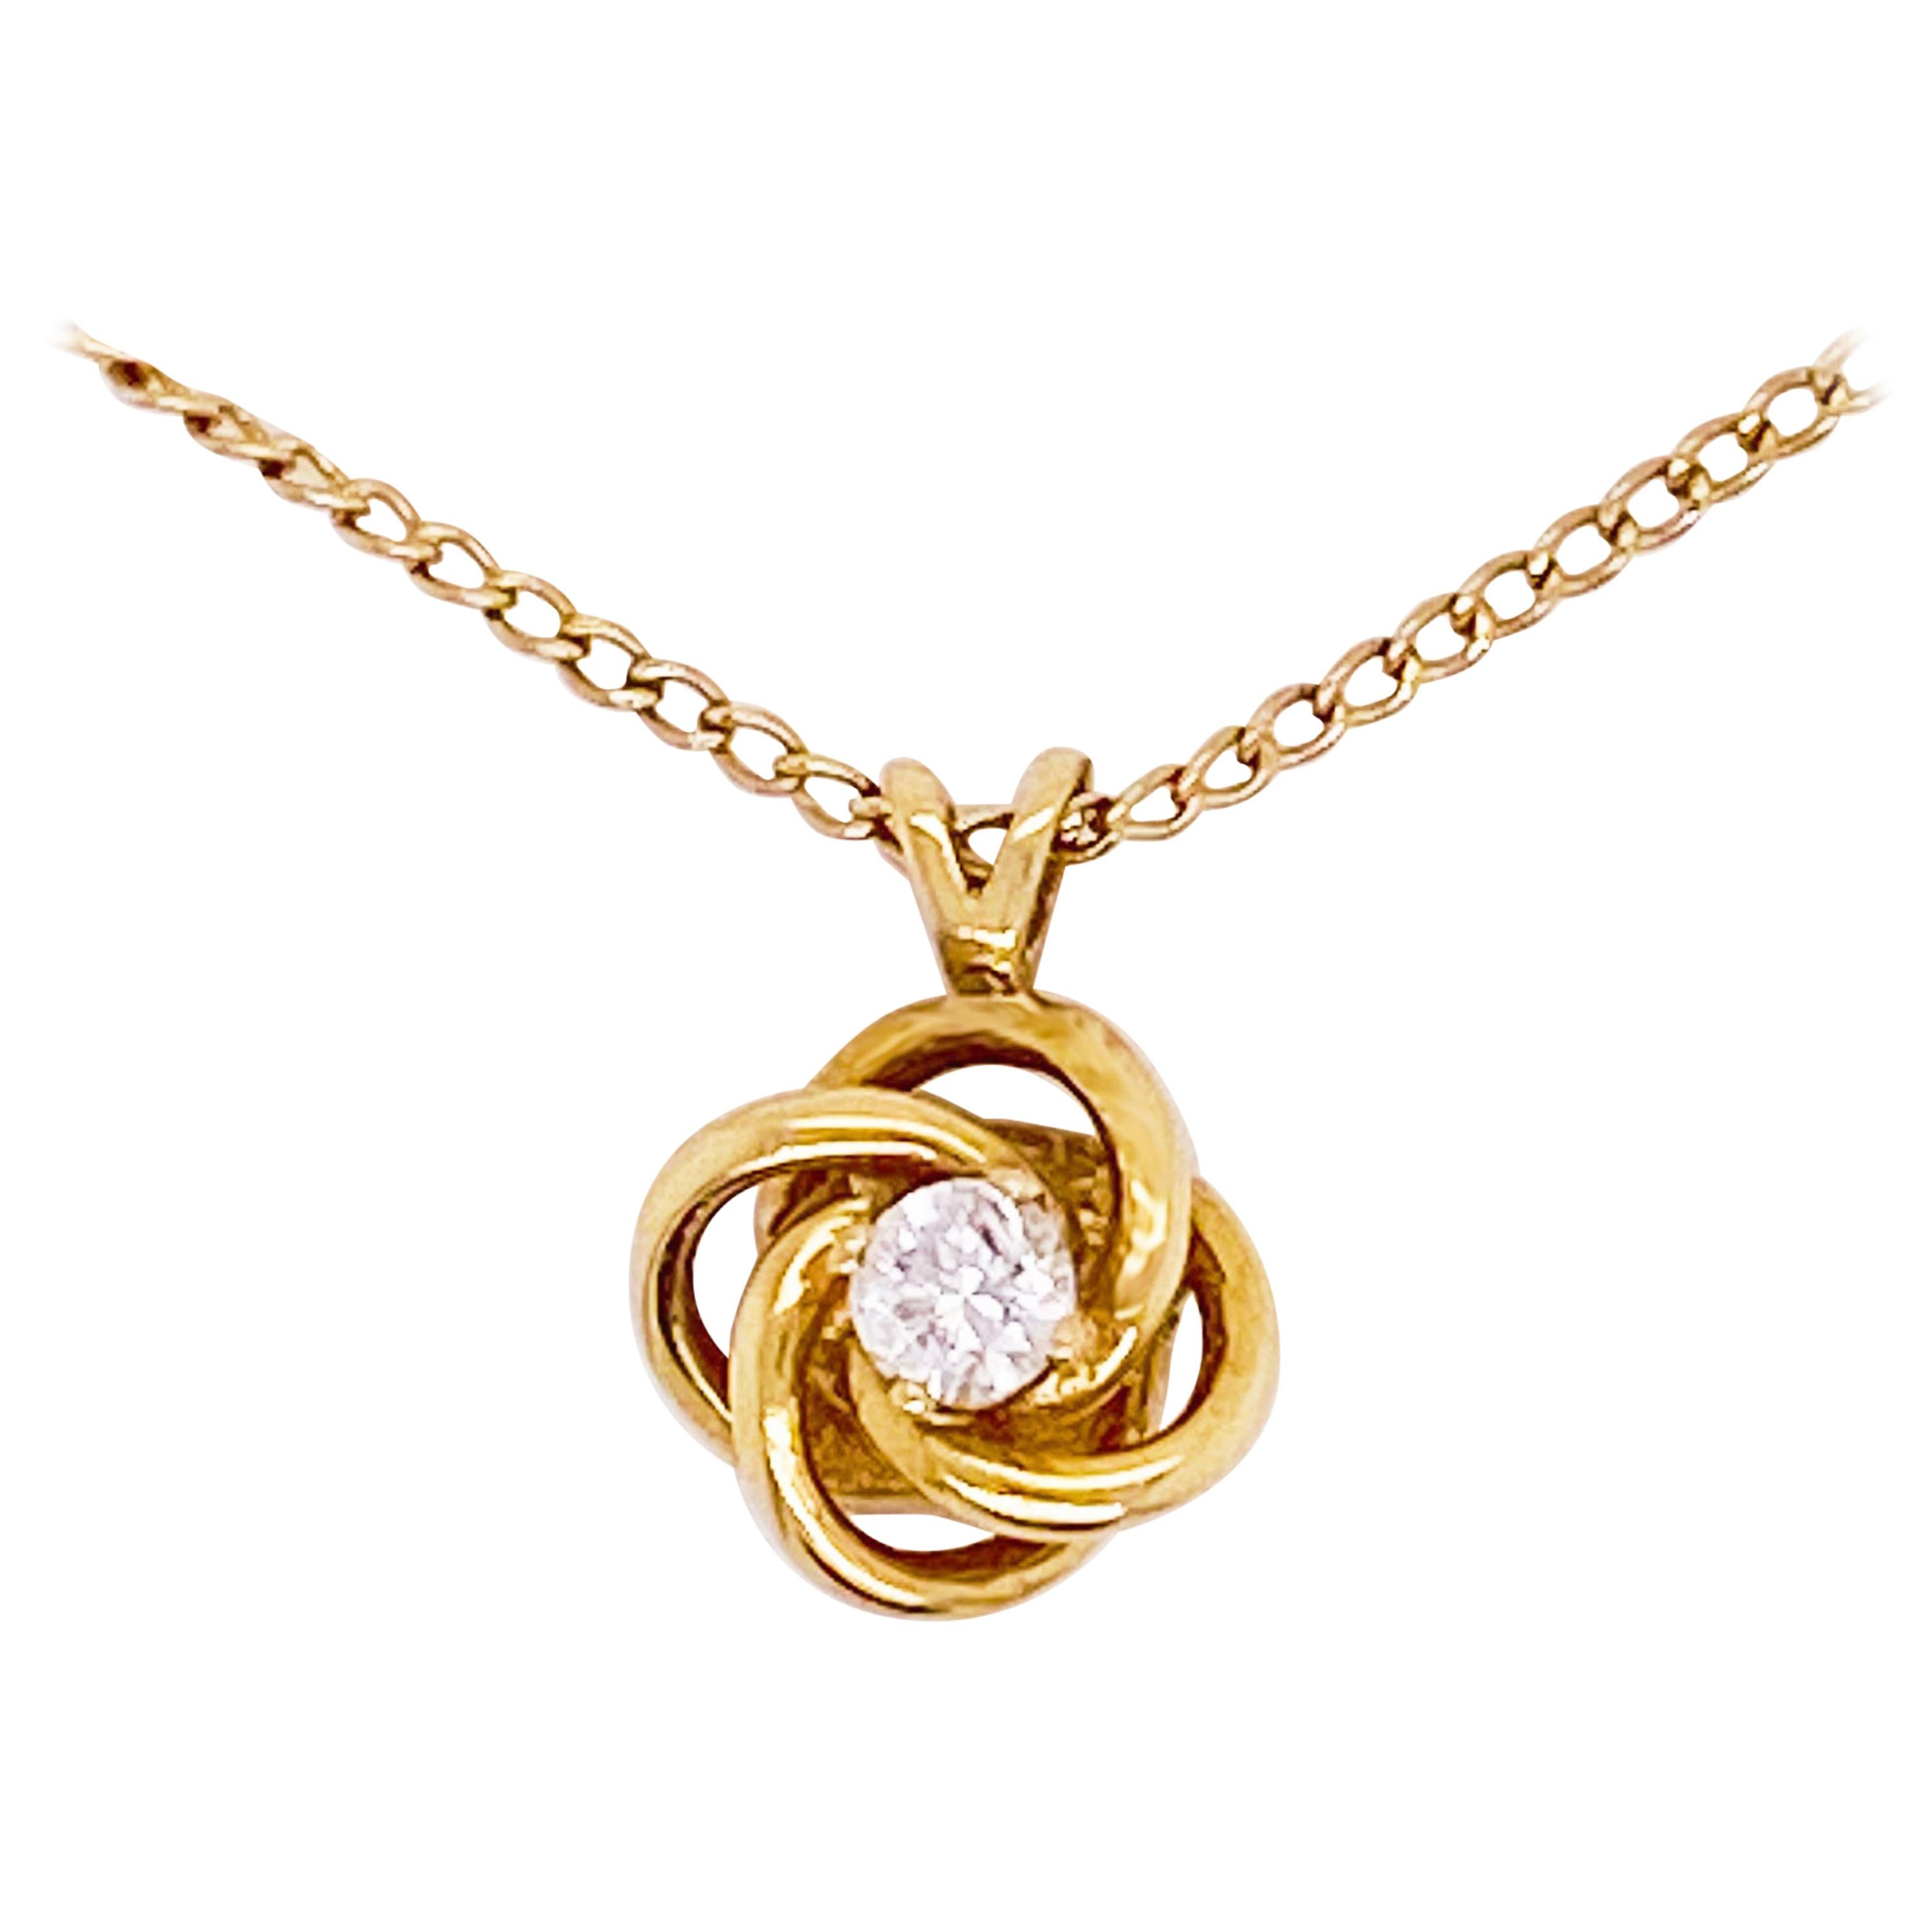 Love Knot Diamond Necklace, 14k Yellow Gold, #NeckMess, True Lovers Knot, Gift